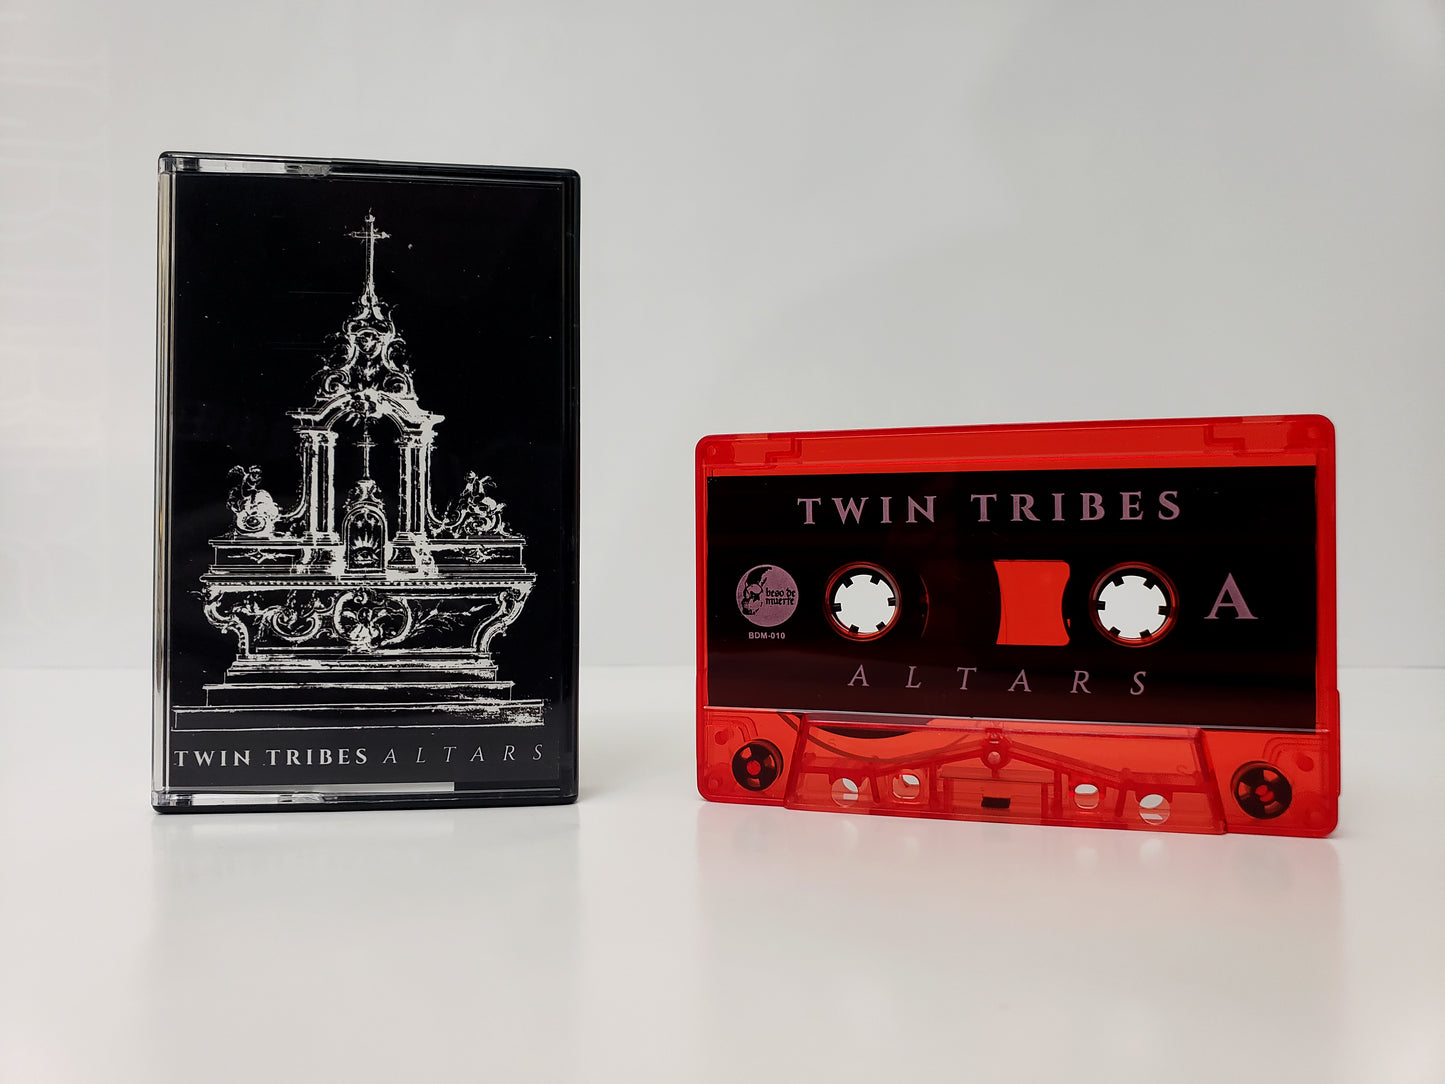 Twin Tribes "Altars"